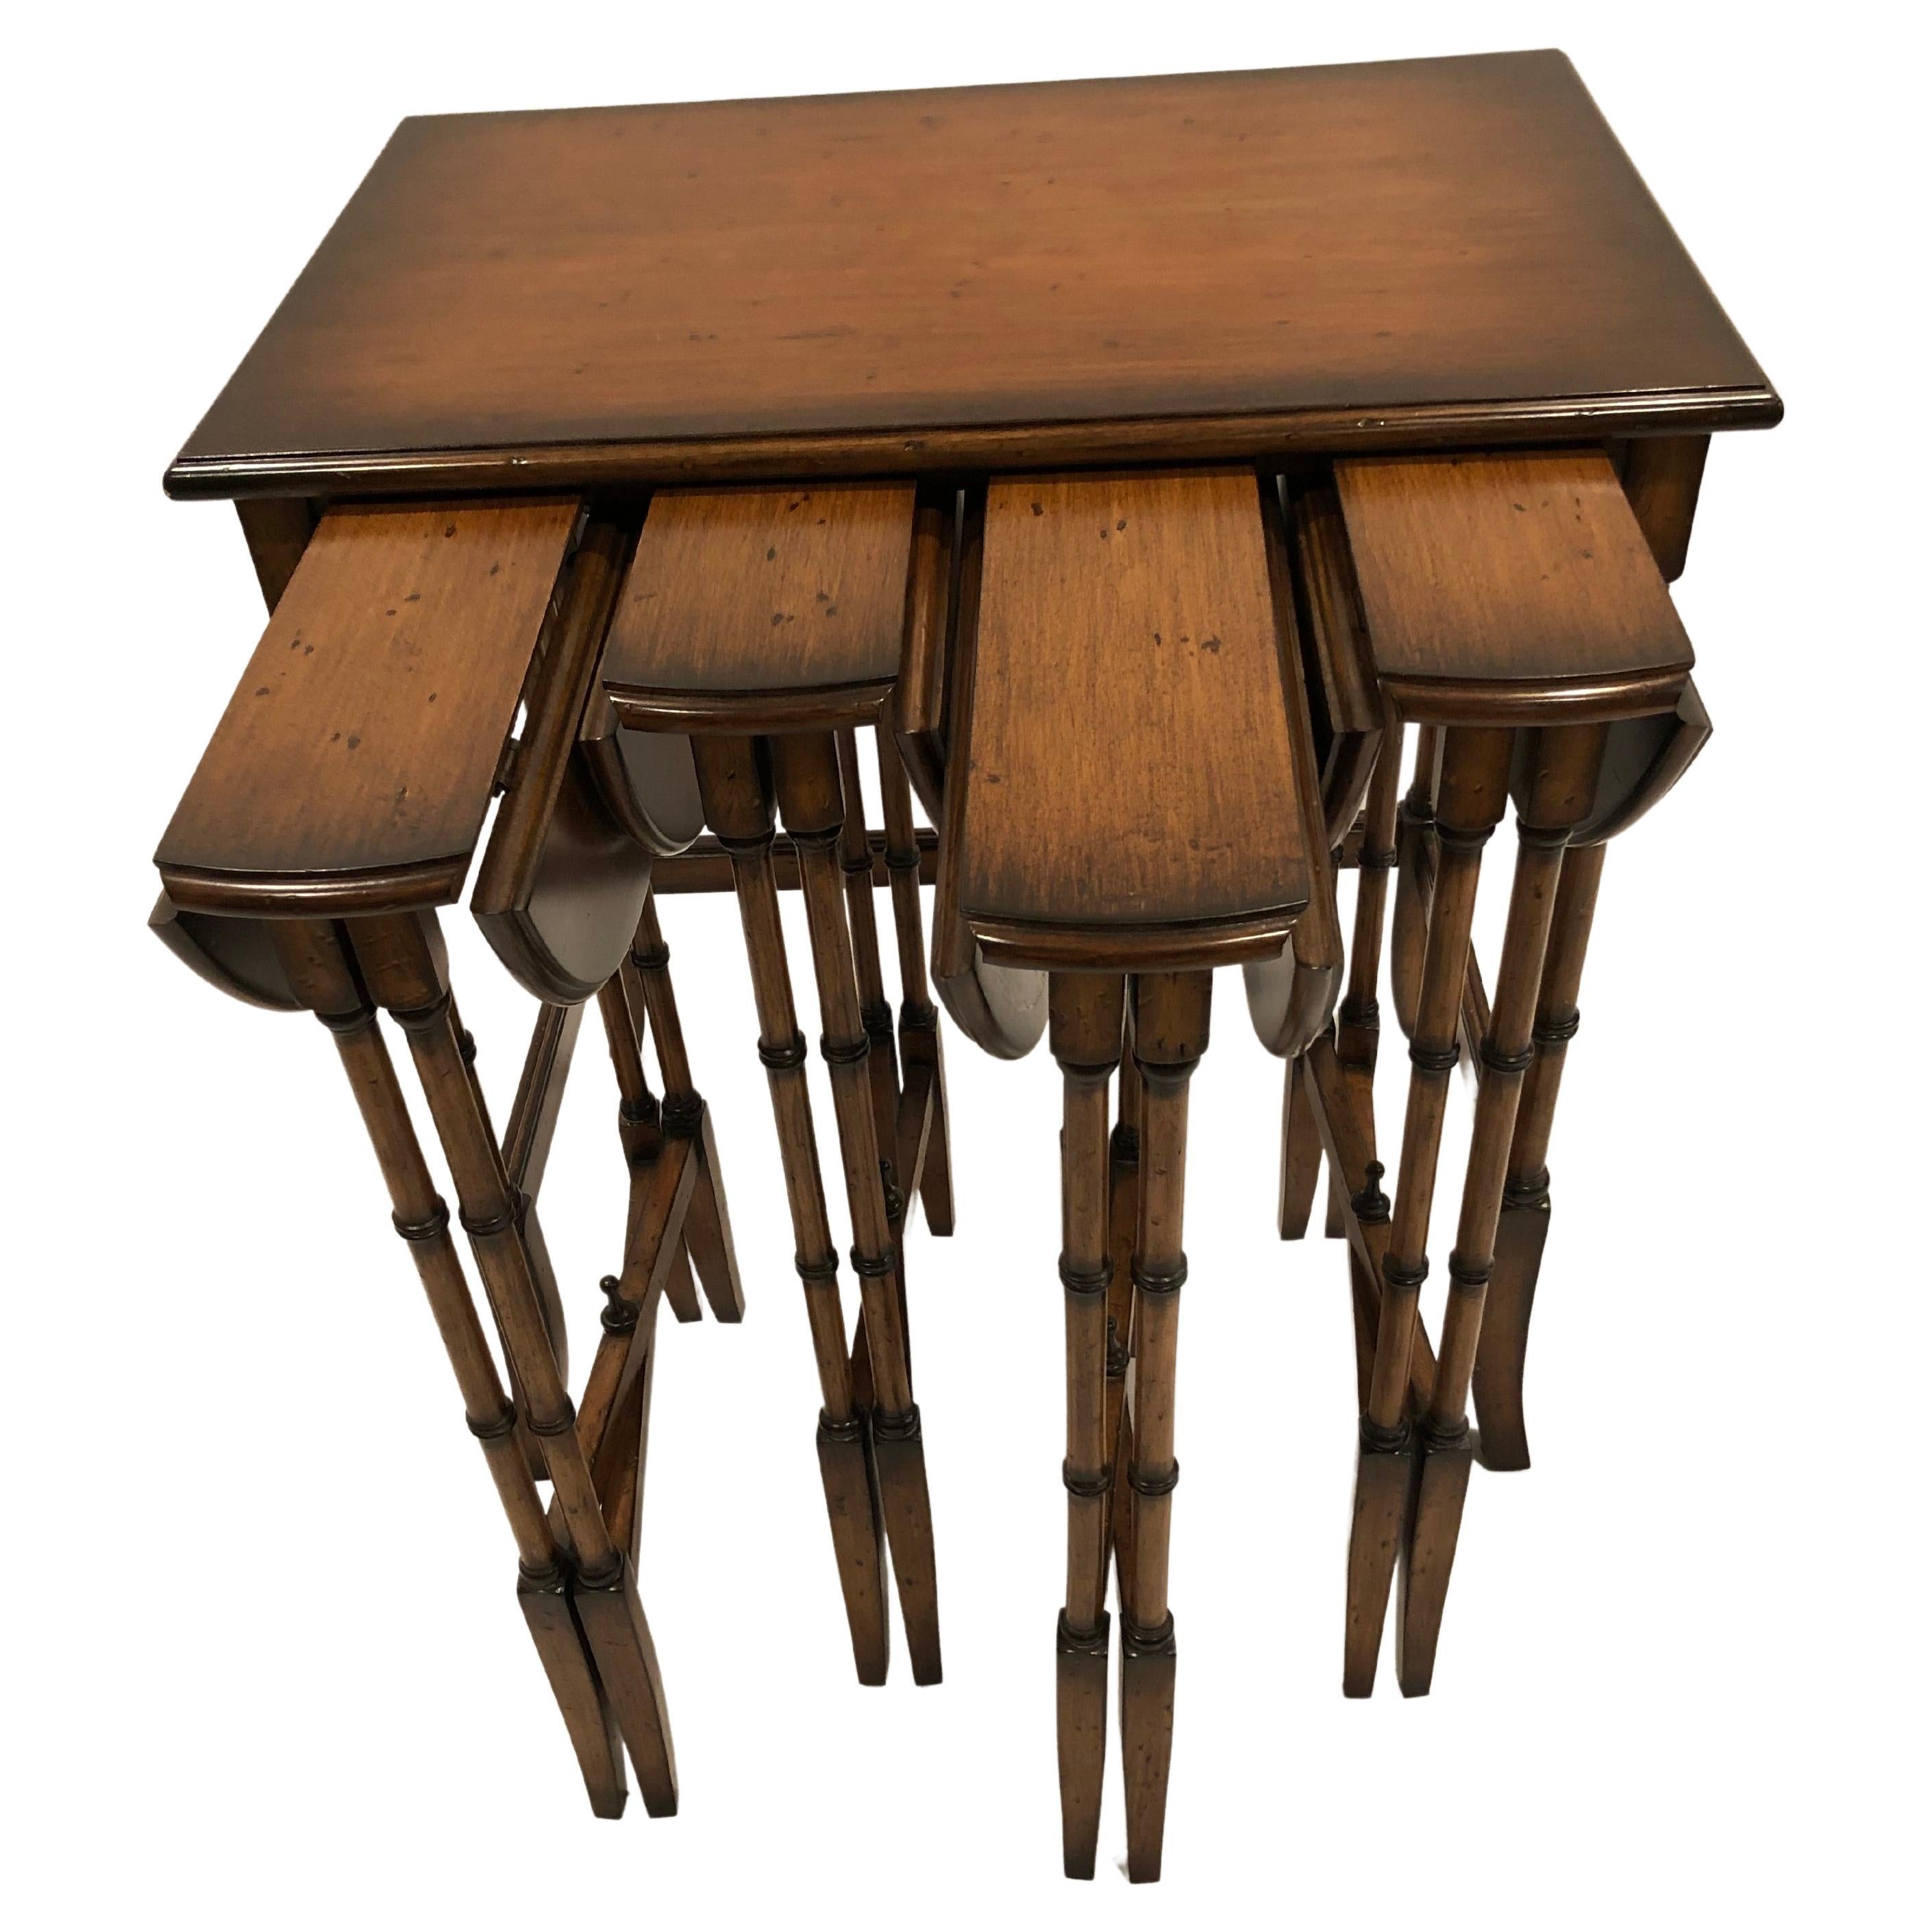 Cleverly Designed Theodore Alexander Nesting Tables with 4 Hidden Round Tables For Sale